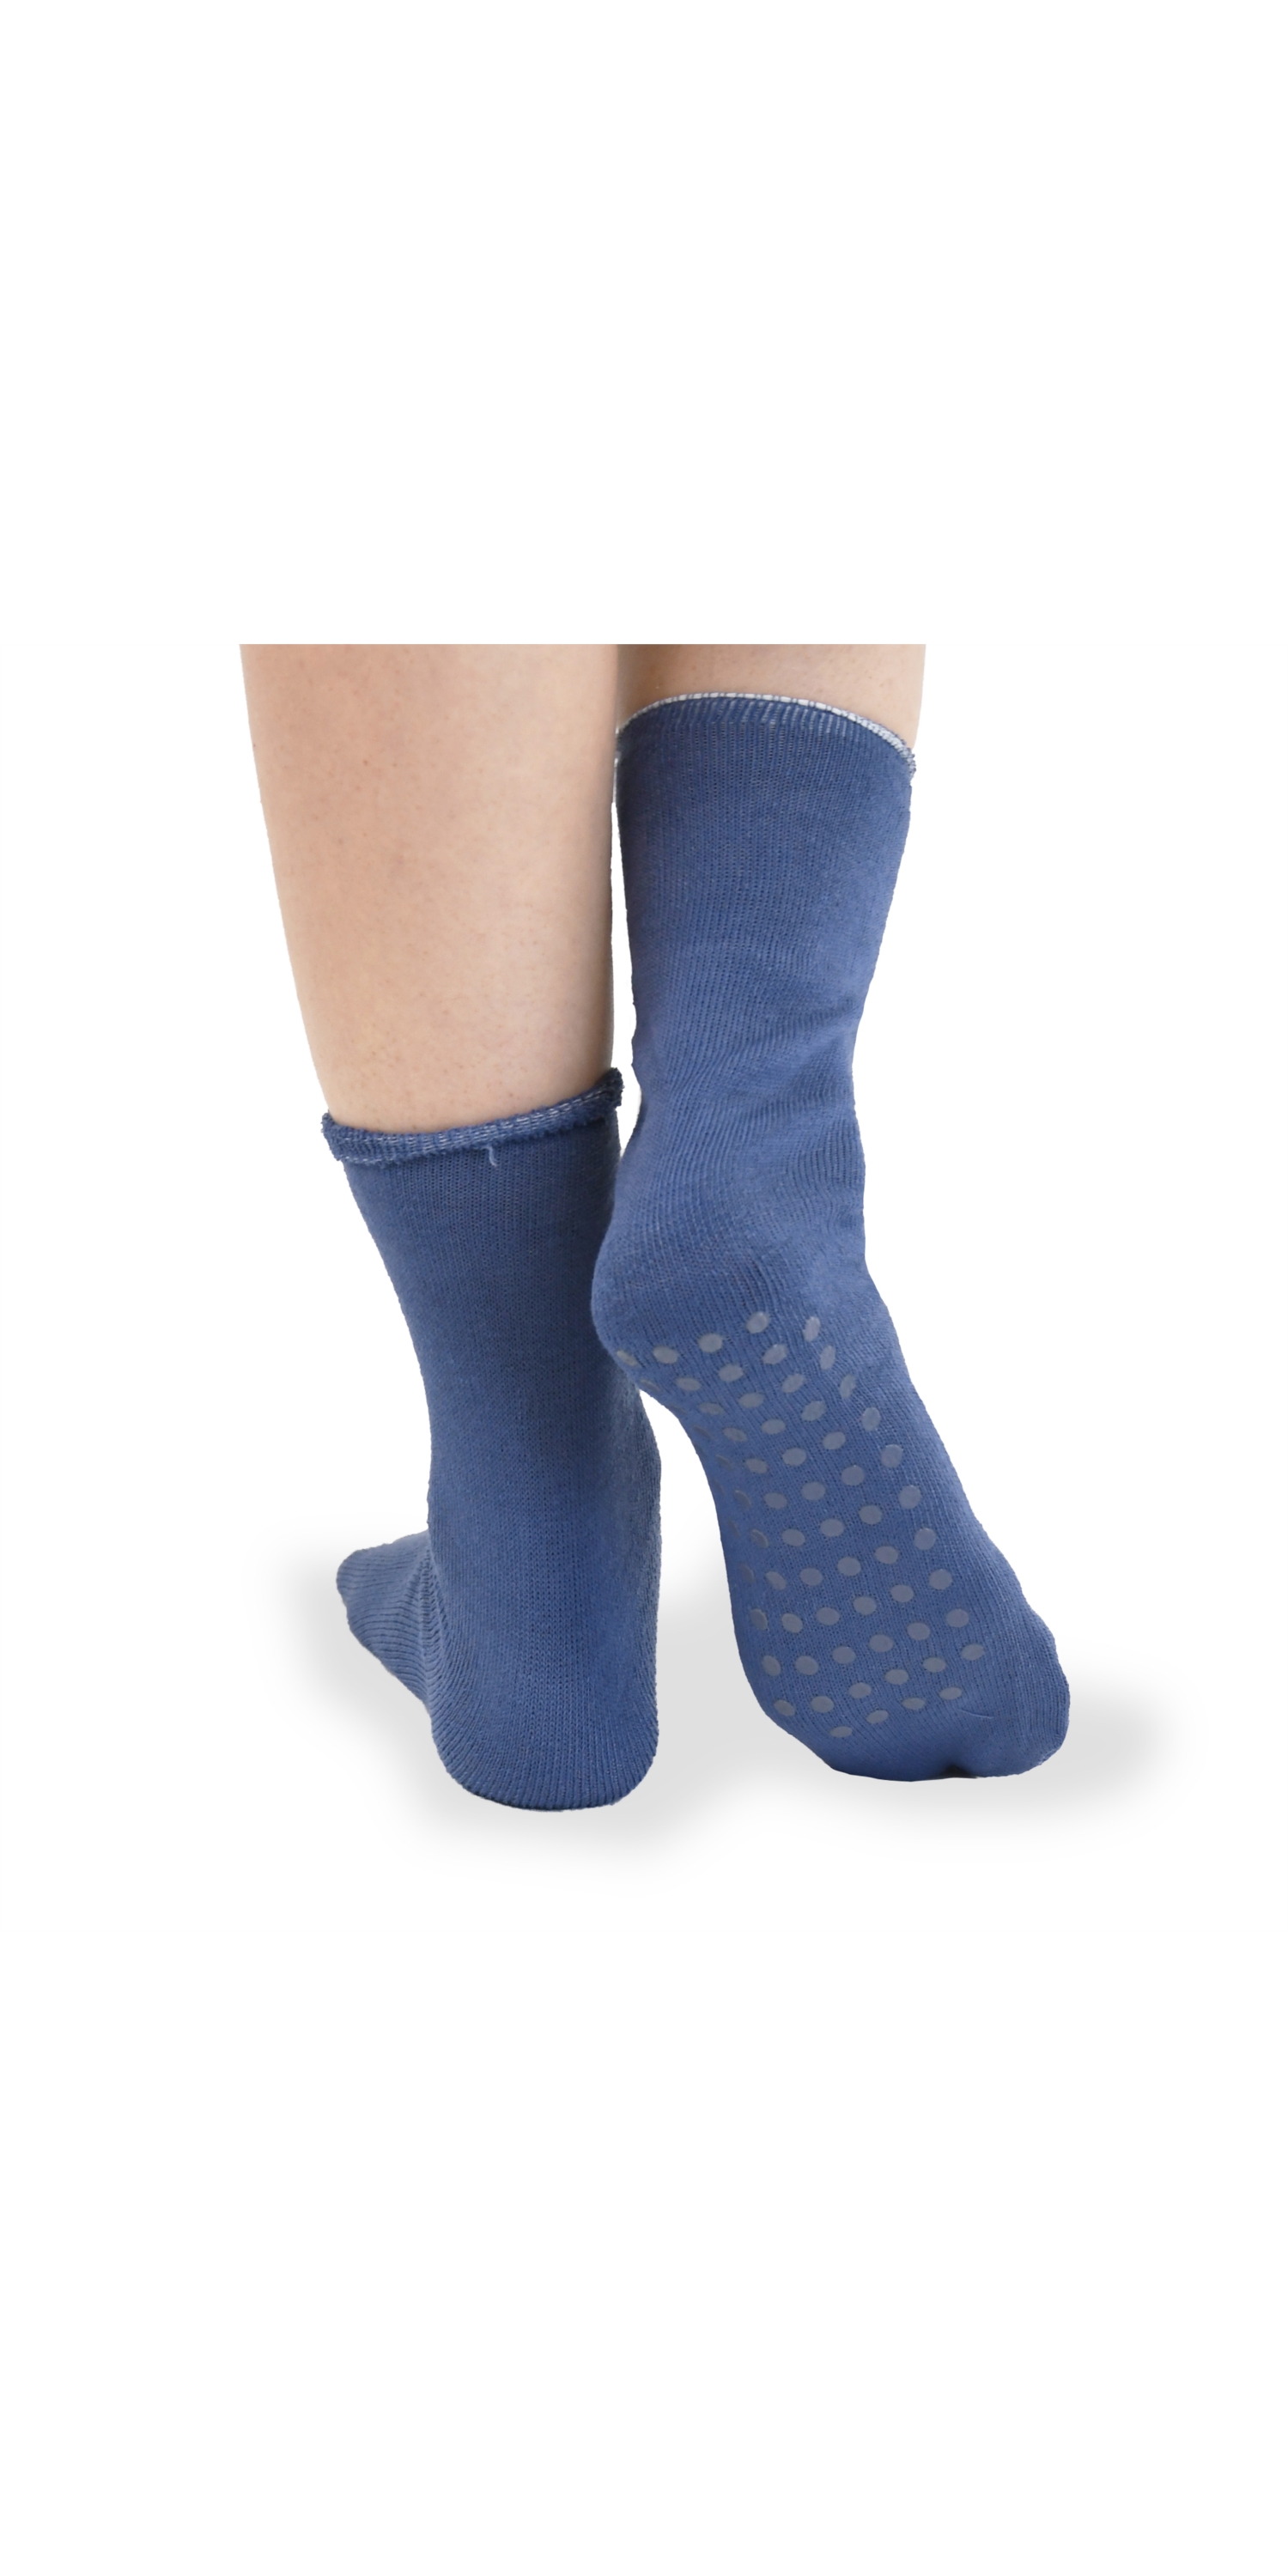 Tucketts Allegro Toeless Non-Slip Grip Socks, Made in Colombia, Mary Jane  Style